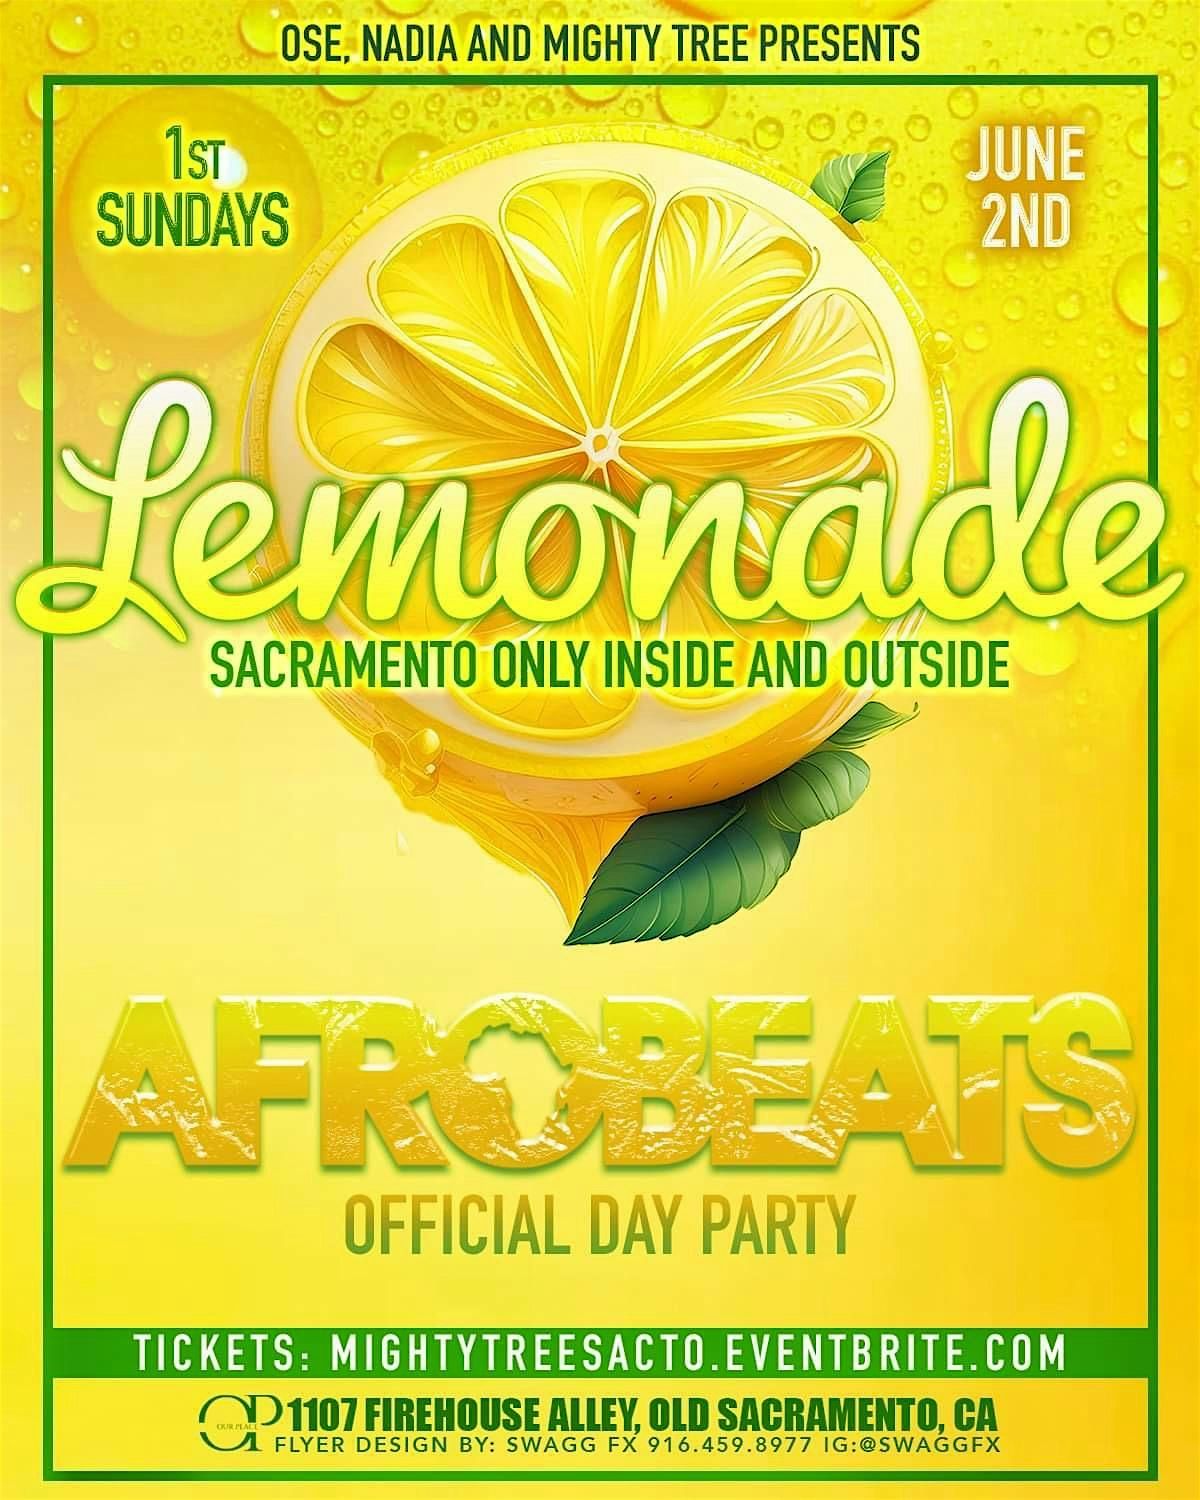 Afro Beats Day Party- Wear Yellow!